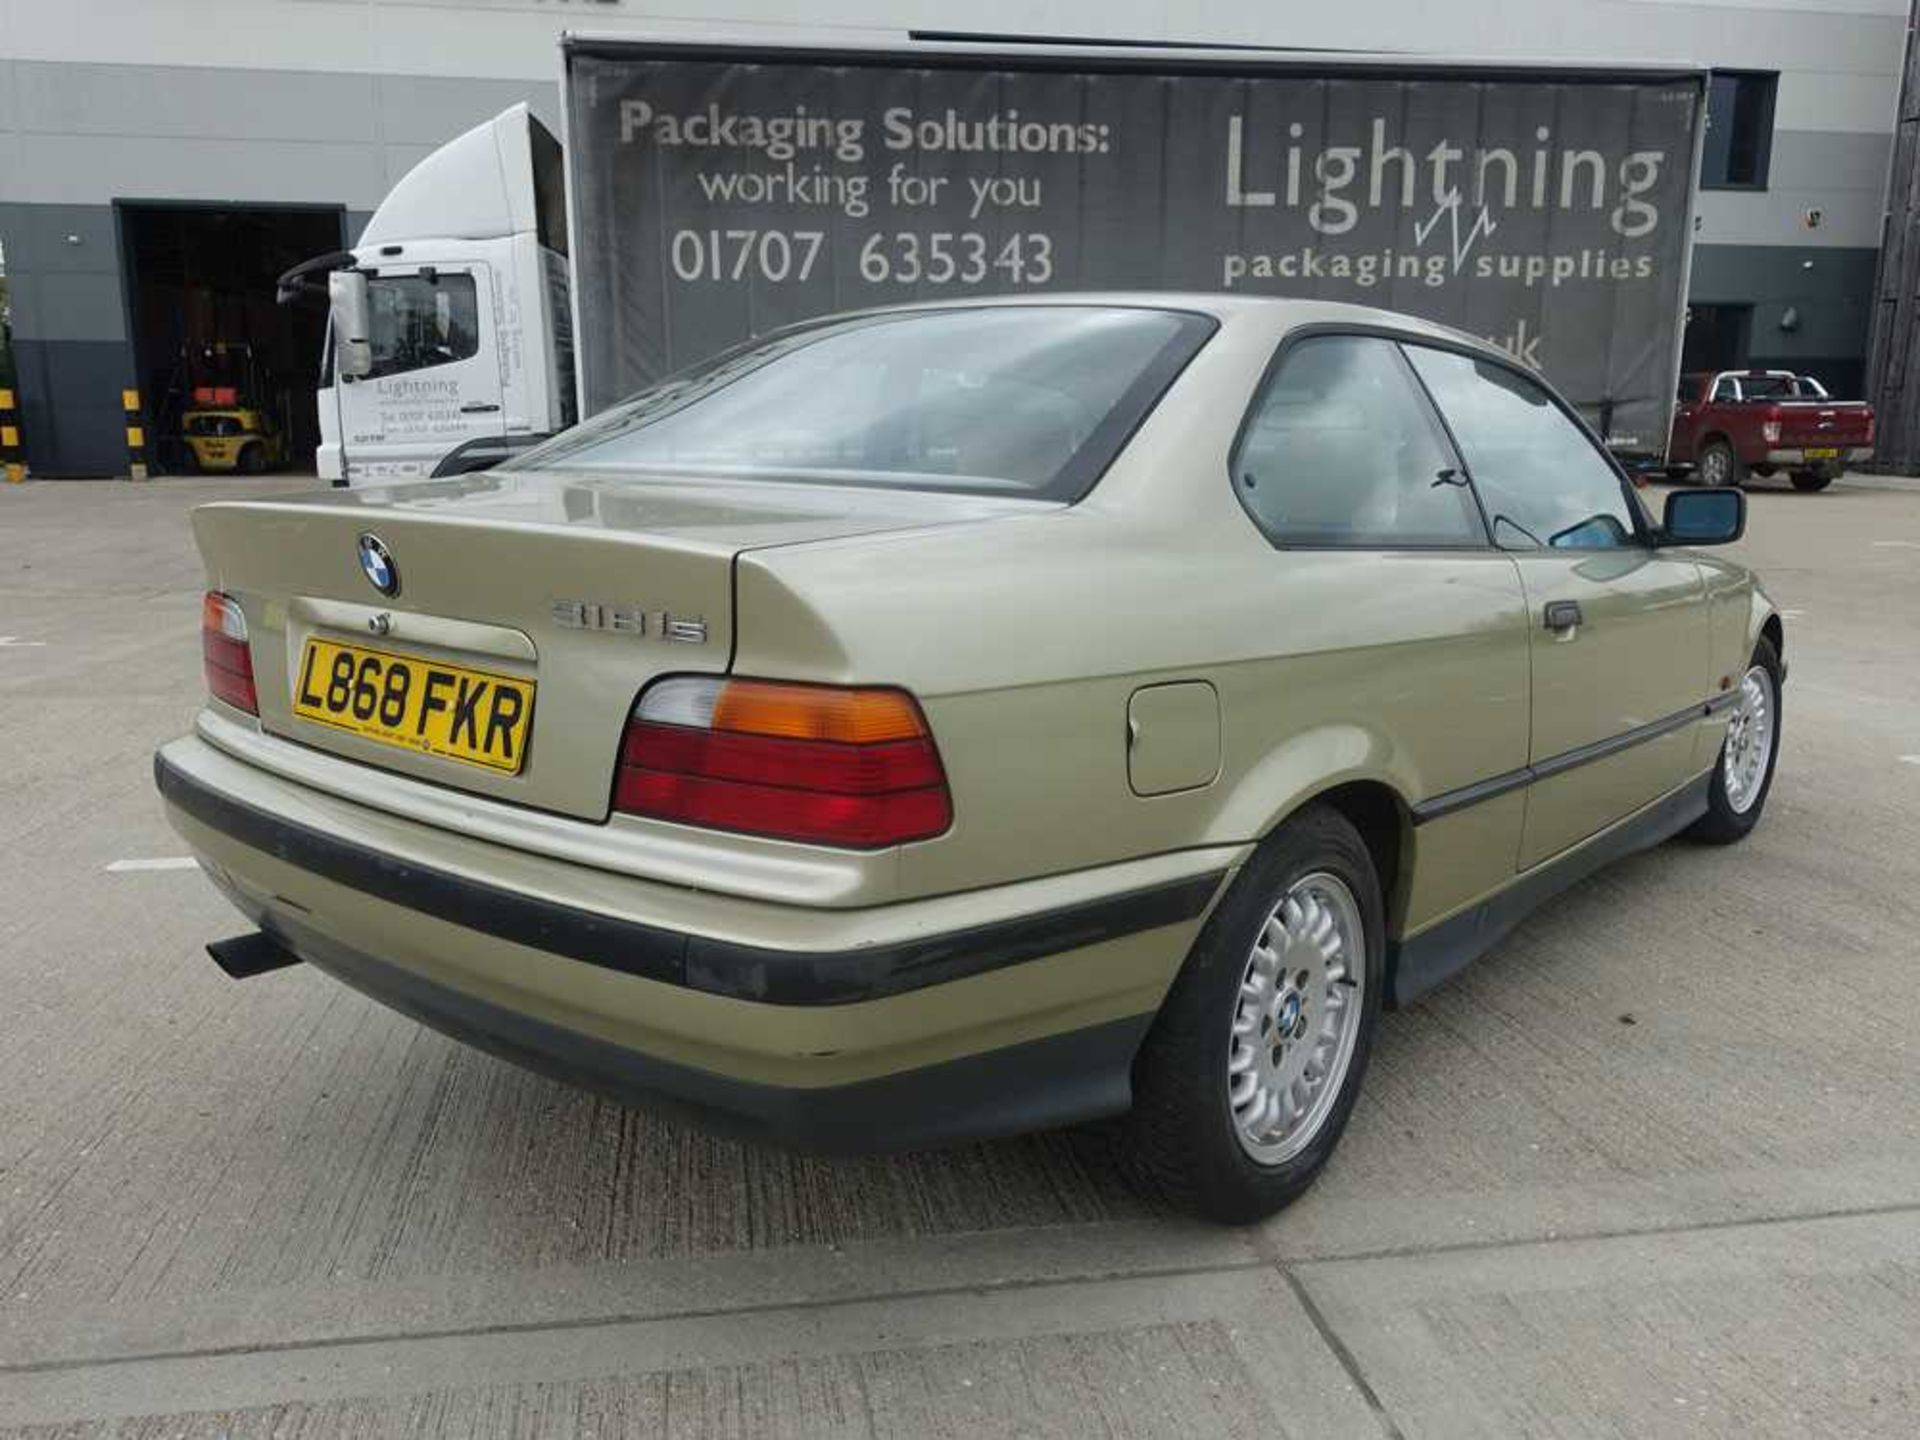 BMW 318 i S Auto Coupe in gold, first registered 16.04.1994, registration plate L868 FKR, 2 door, - Image 6 of 12